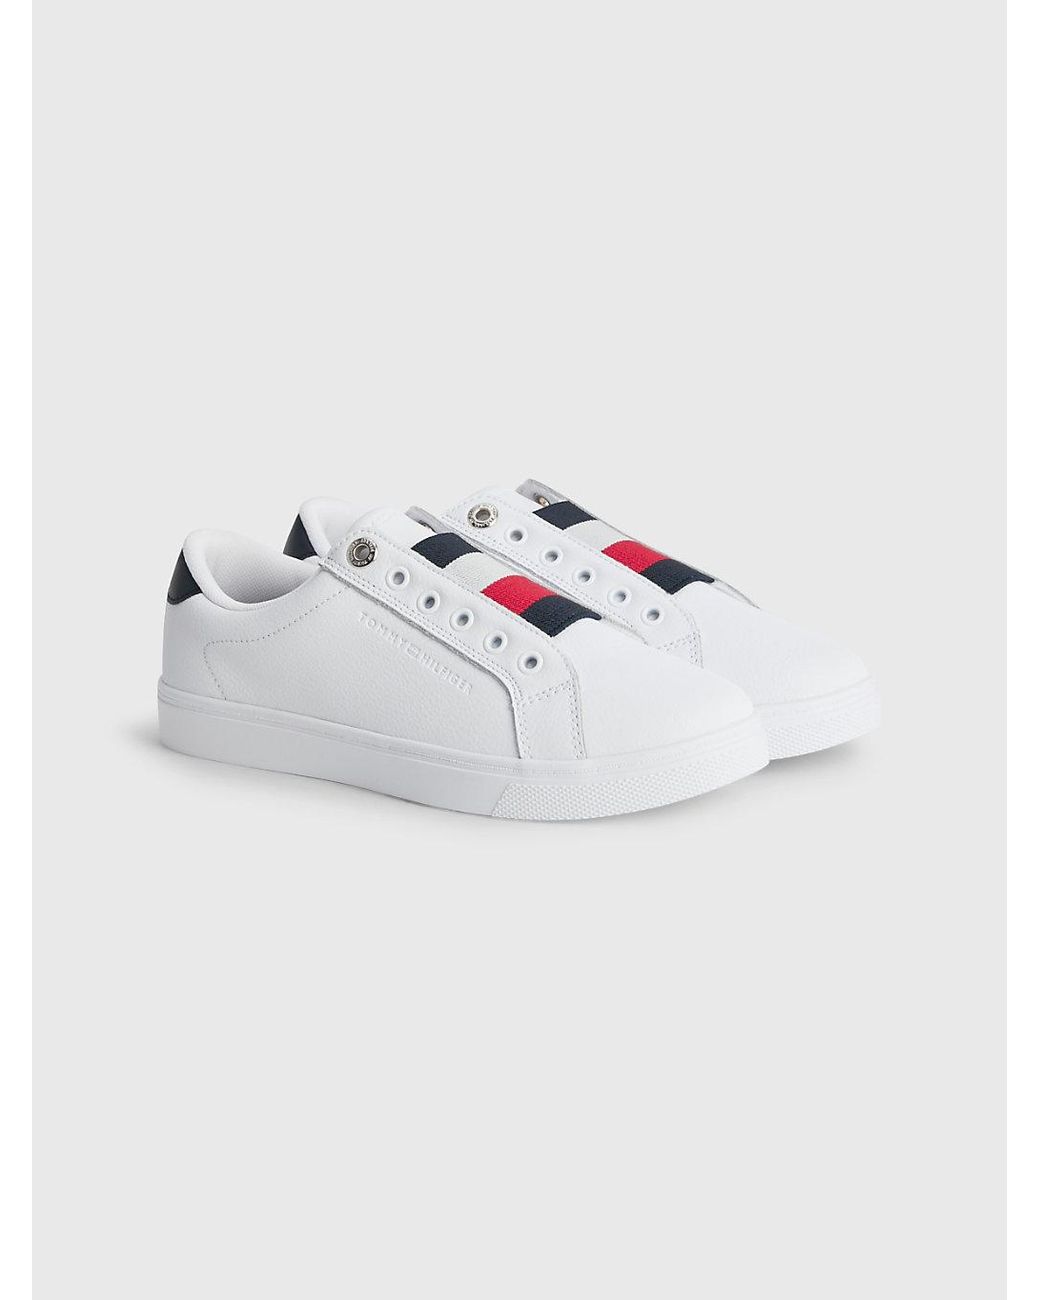 Tommy Hilfiger Essential Slip-on Leather Cupsole Trainers in White | Lyst UK